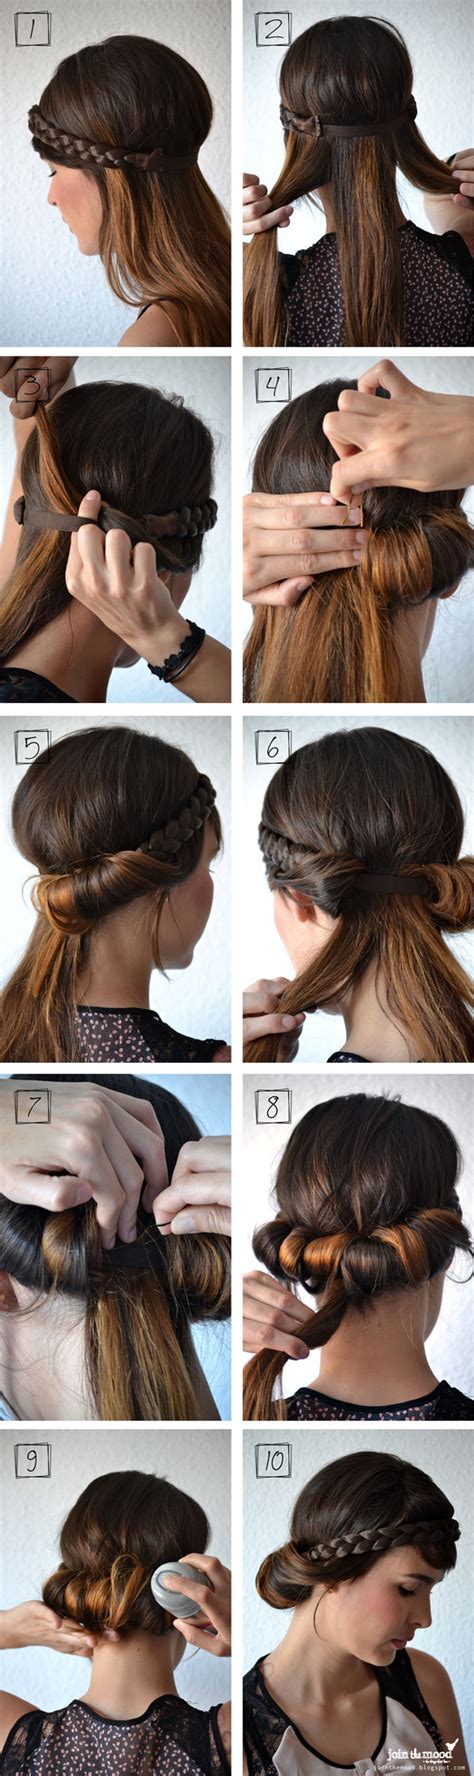 Diy, sewing, fashion & tips on how to streamline life + blogging. 10 Fabulous DIY Hairstyles With Hair Accessories - Pretty Designs